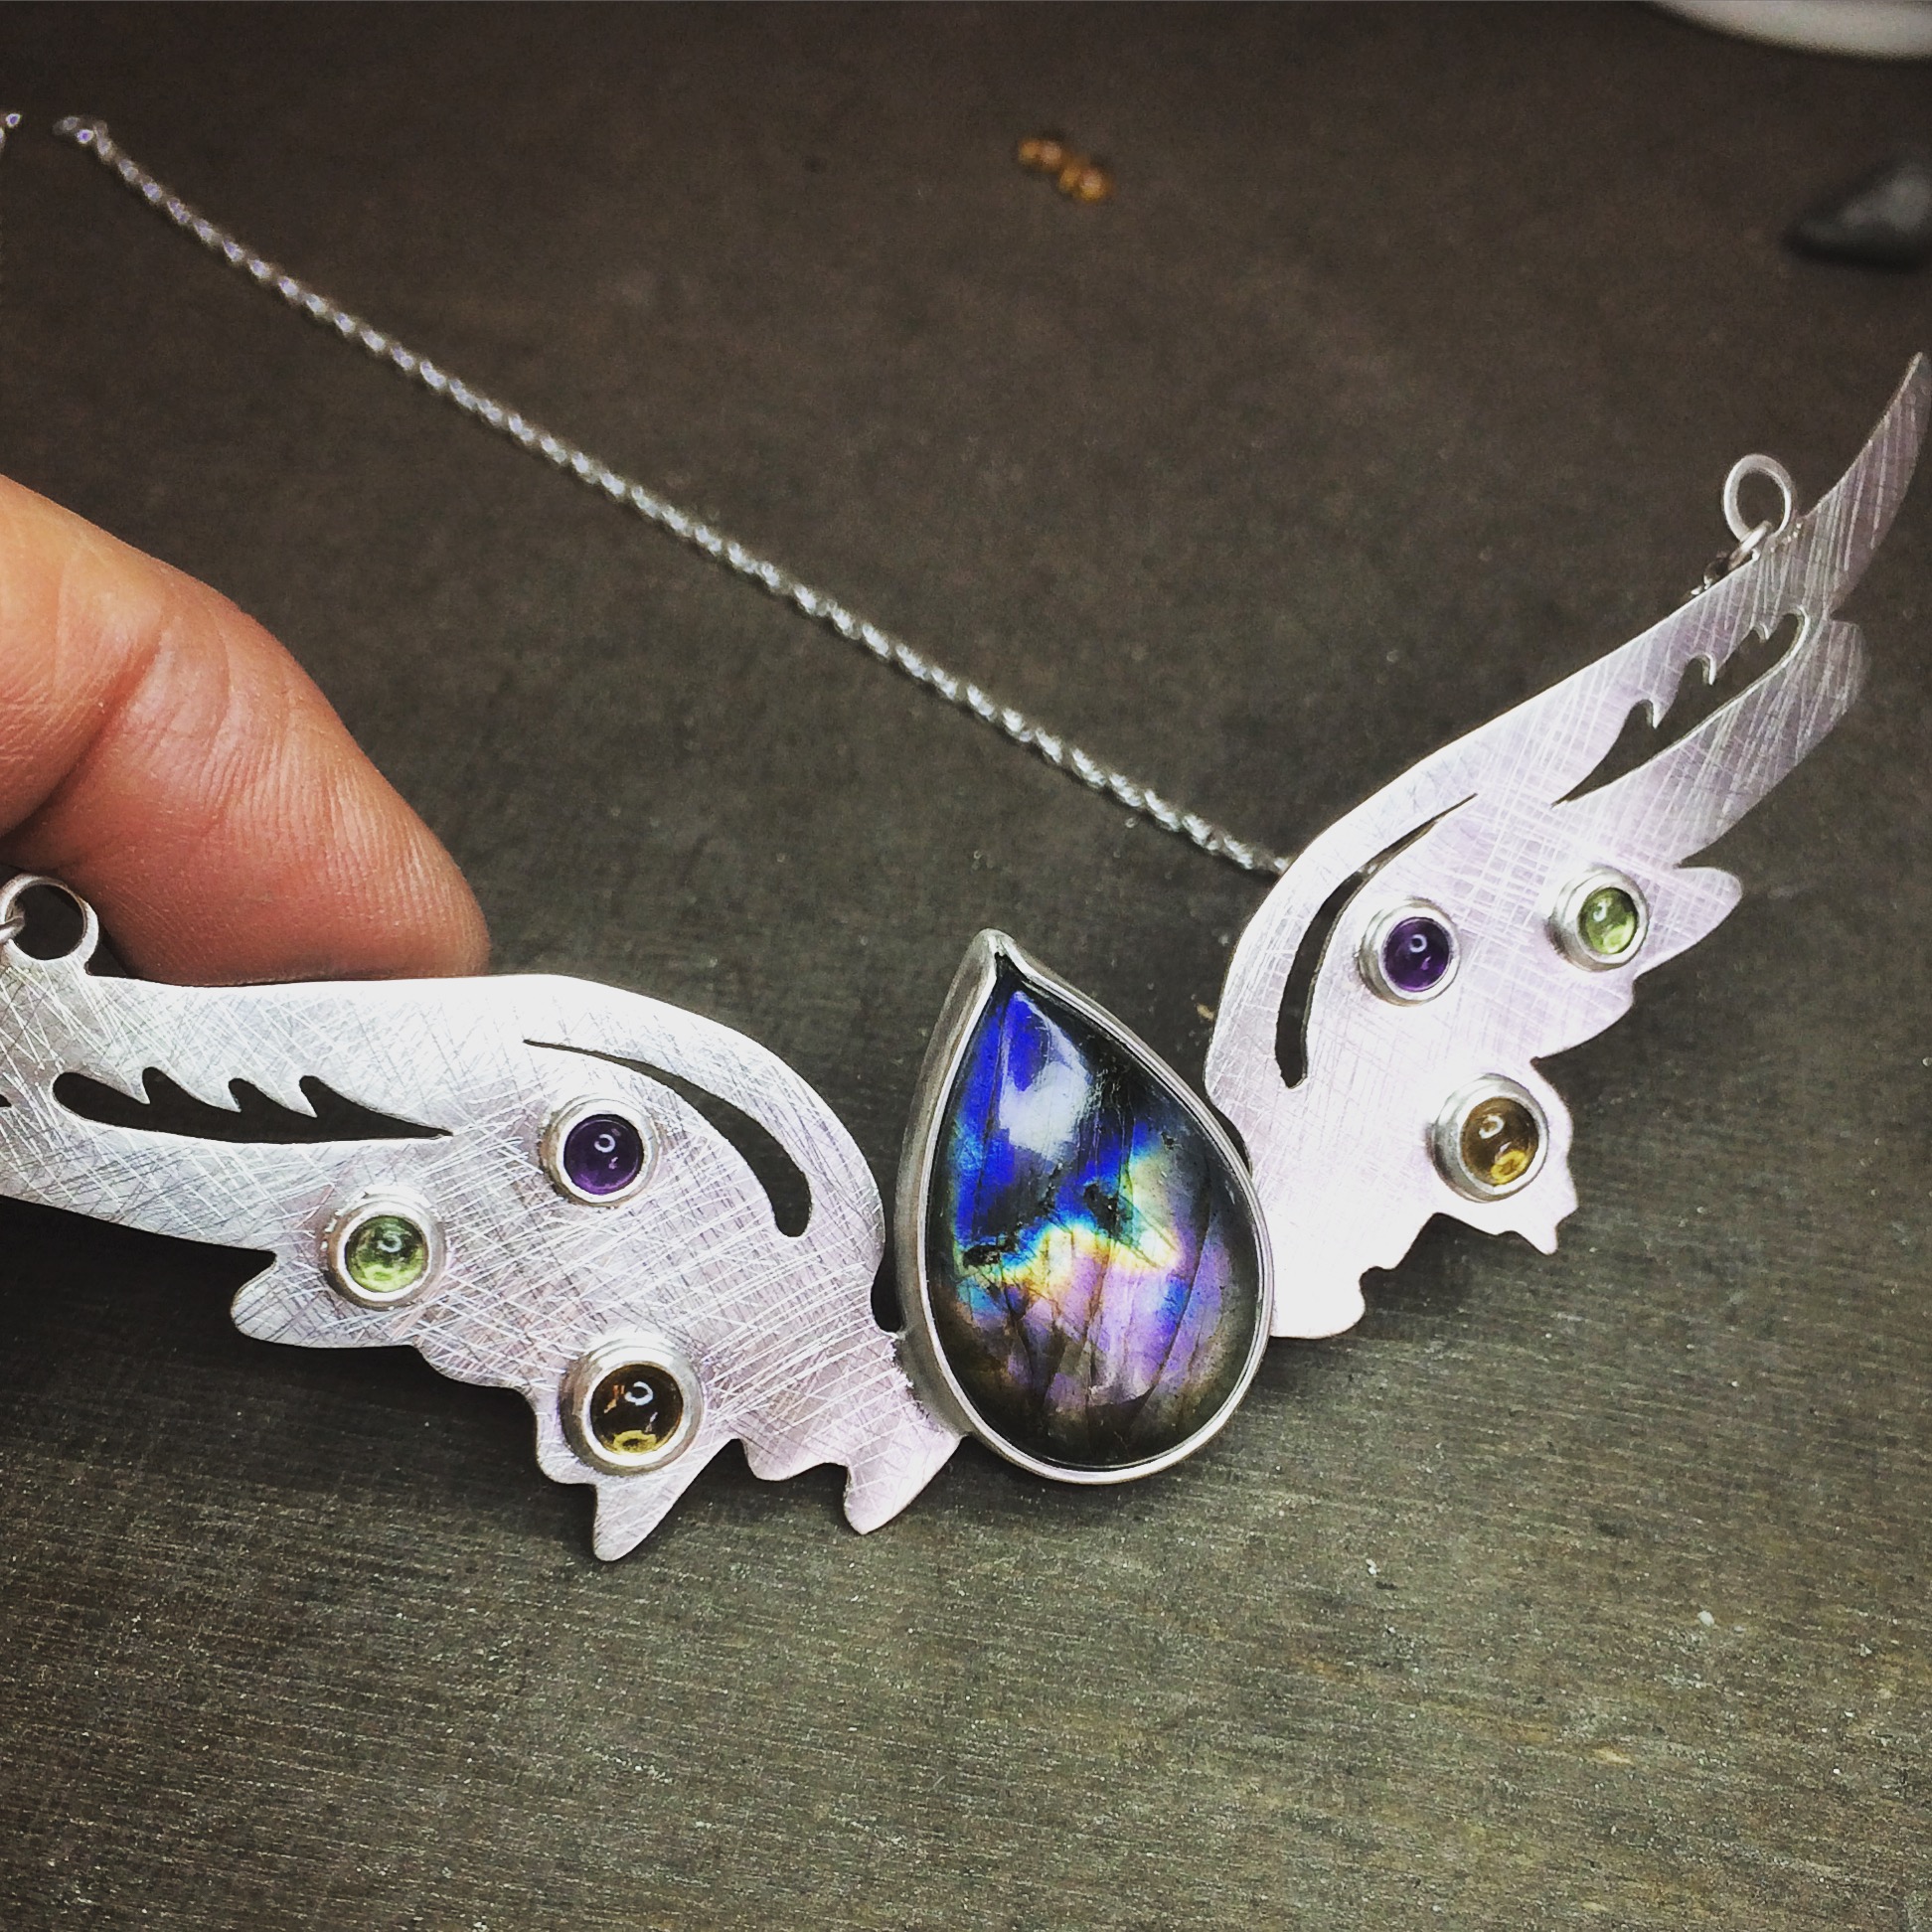 Hermes Wings pendant set with labradorite, amethyst, peridot, and citrine